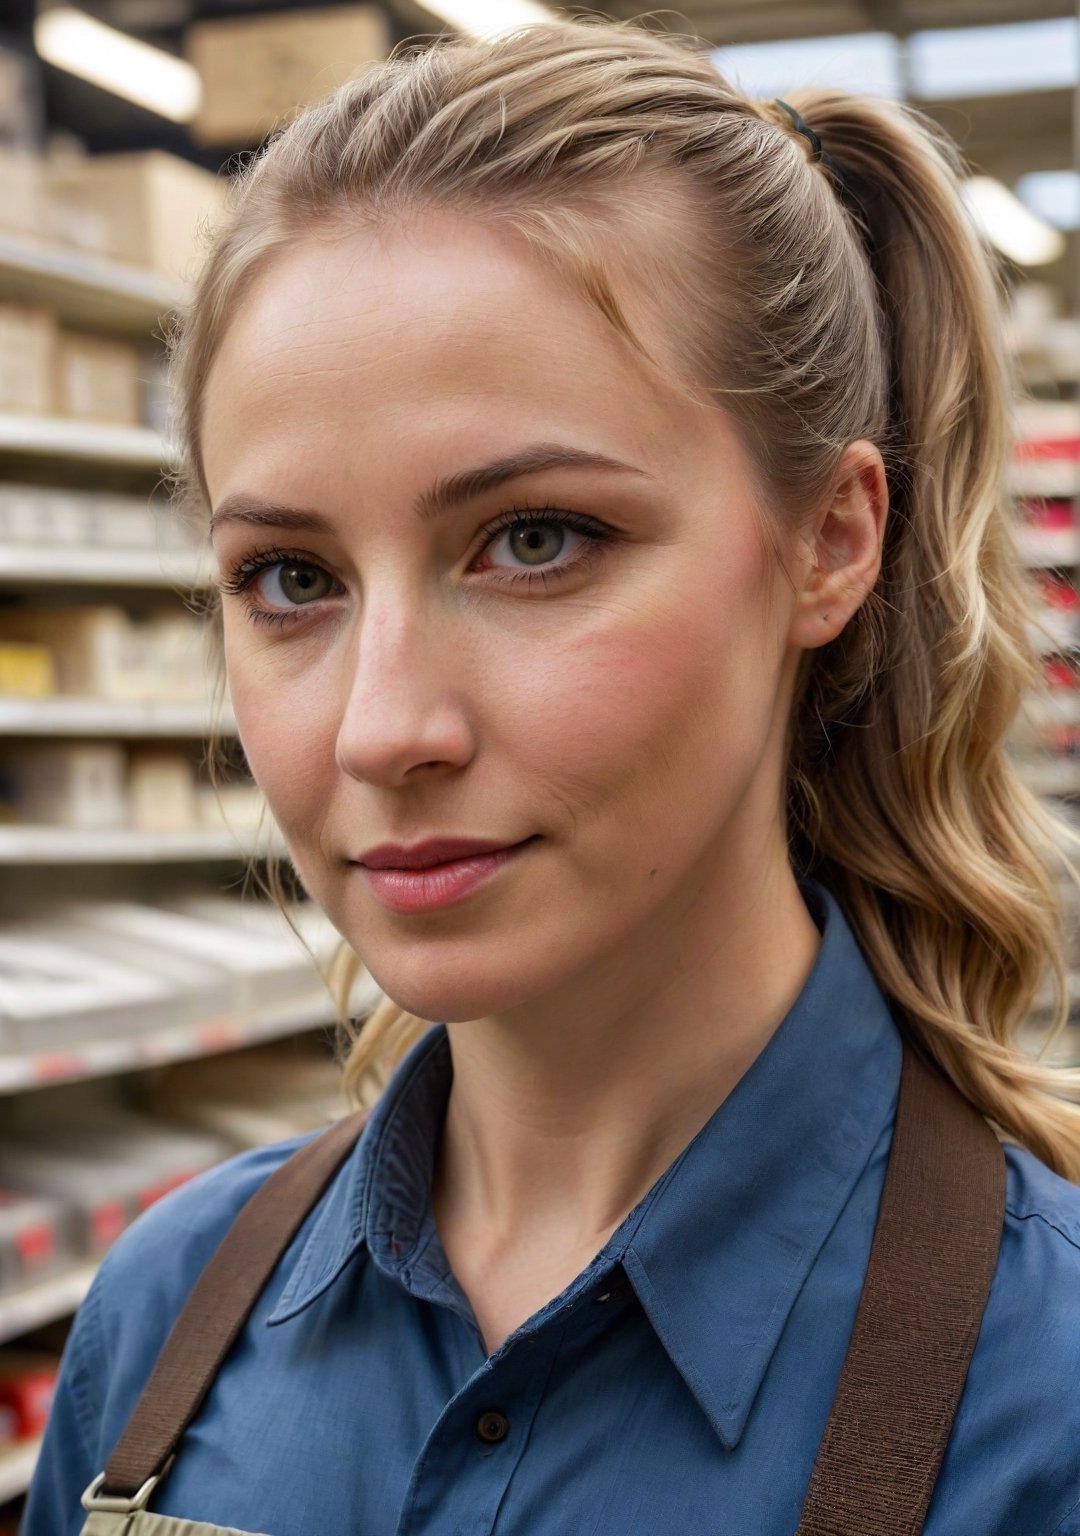 Hardware store view of a British electrician, 32 years old, showcasing a blend of competence and subtle allure, with a focused, approachable face, found amidst the aisles of a busy London hardware shop. She's confidently advising a customer on electrical supplies, her posture relaxed yet authoritative, a hint of a smile suggesting both expertise and charm.

Her hair, a soft, sandy blonde, is tied back in a practical ponytail, strands occasionally escaping to frame her face. Her eyes, clear and attentive, make direct, engaging contact with those she's helping, her lips curved in an easy, inviting smile.

She has a fit, capable build. Wearing a (fitted work shirt) tucked into (durable utility trousers), her attire is functional yet flattering, complementing her professional role. Her feet, in (sturdy safety boots), are firmly planted on the ground, her whole demeanor exuding a sense of reliability and a welcoming air of approachability.
 8k uhd, dslr, soft lighting, high quality, film grain, Fujifilm XT3, high quality photography, 3 point lighting, flash with softbox, 4k, Canon EOS R3, hdr, smooth, sharp focus, high resolution, award winning photo, 80mm, f2.8, bokeh, (Highest Quality, 4k, masterpiece, Amazing Details:1.1), film grain, Fujifilm XT3, photography,
detailed eyes, epic, dramatic, fantastical, full body, intricate design and details, dramatic lighting, hyperrealism, photorealistic, cinematic, 8k, detailed face. Extremely Realistic, art by sargent, PORTRAIT PHOTO, Aligned eyes, Iridescent Eyes, (blush, eye_wrinkles:0.6), (goosebumps:0.5), subsurface scattering, ((skin pores)), (detailed skin texture), (( textured skin)), realistic dull (skin noise), visible skin detail, skin fuzz, dry skin, hyperdetailed face, sharp picture, sharp detailed, (((analog grainy photo vintage))), Rembrandt lighting, ultra focus, illuminated face, detailed face, 8k resolution
,photo r3al,Extremely Realistic,aw0k euphoric style,PORTRAIT PHOTO,Enhanced Reality